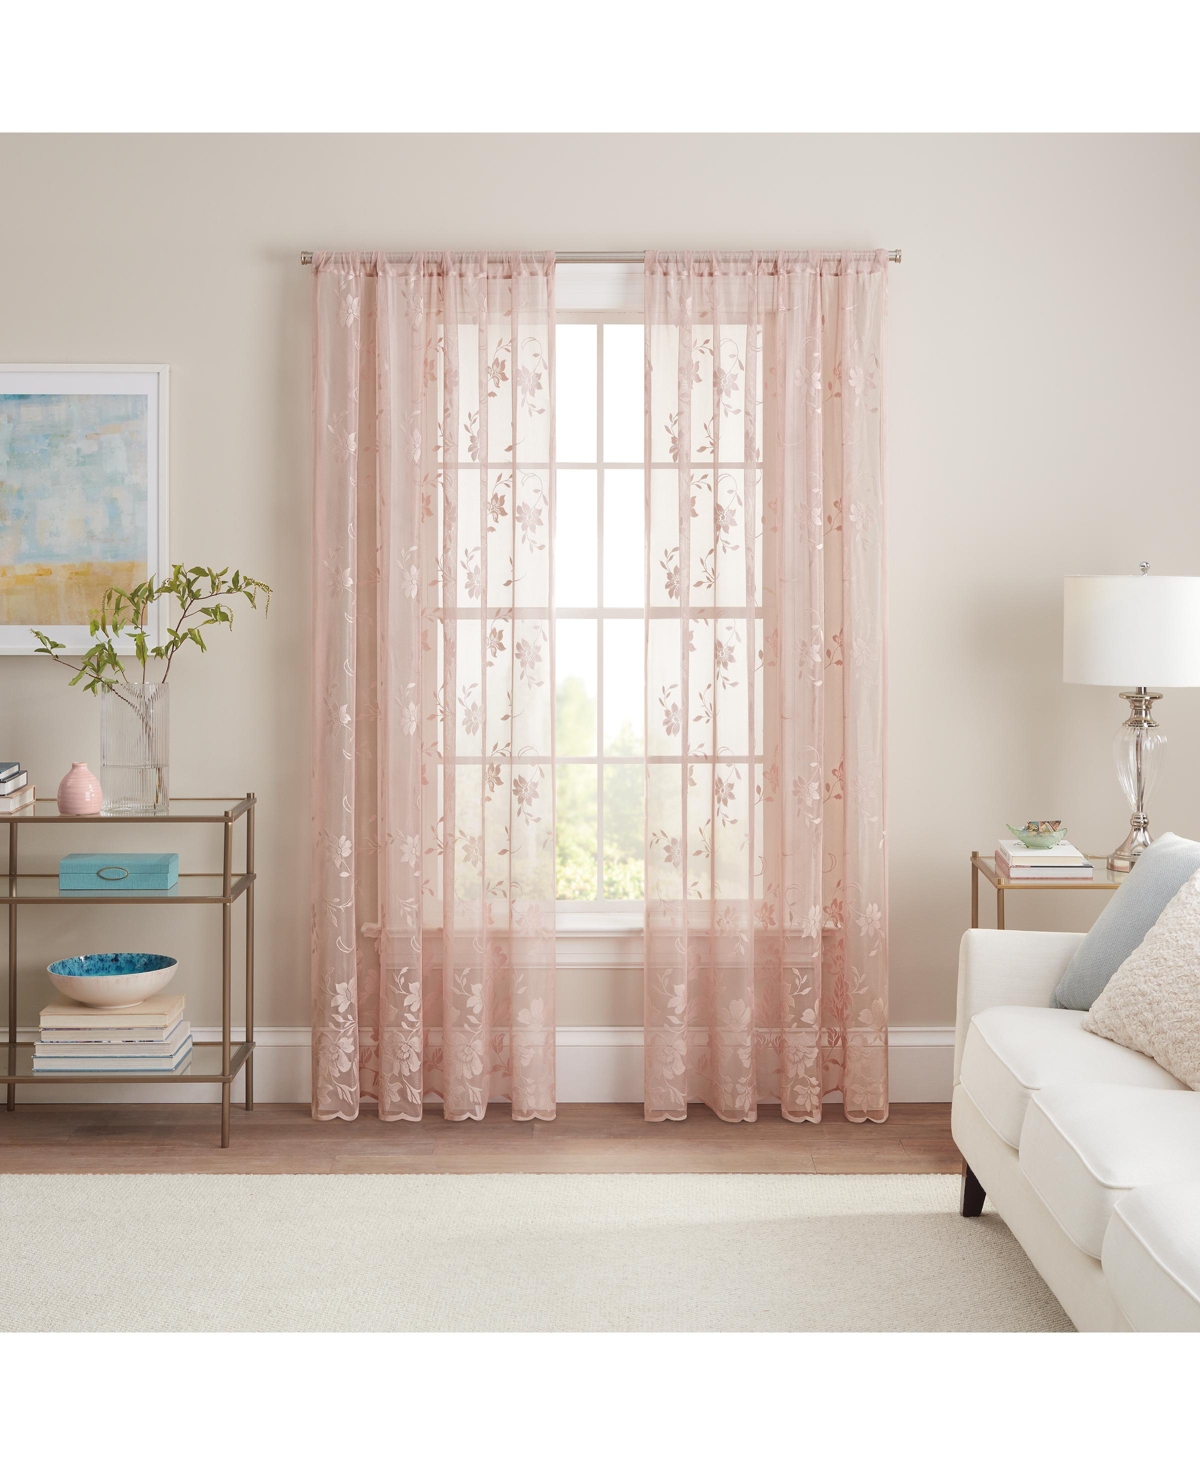 Sherry Floral Lace Sheer Rod Pocket Curtain Panel, 54" x 63" - Blush